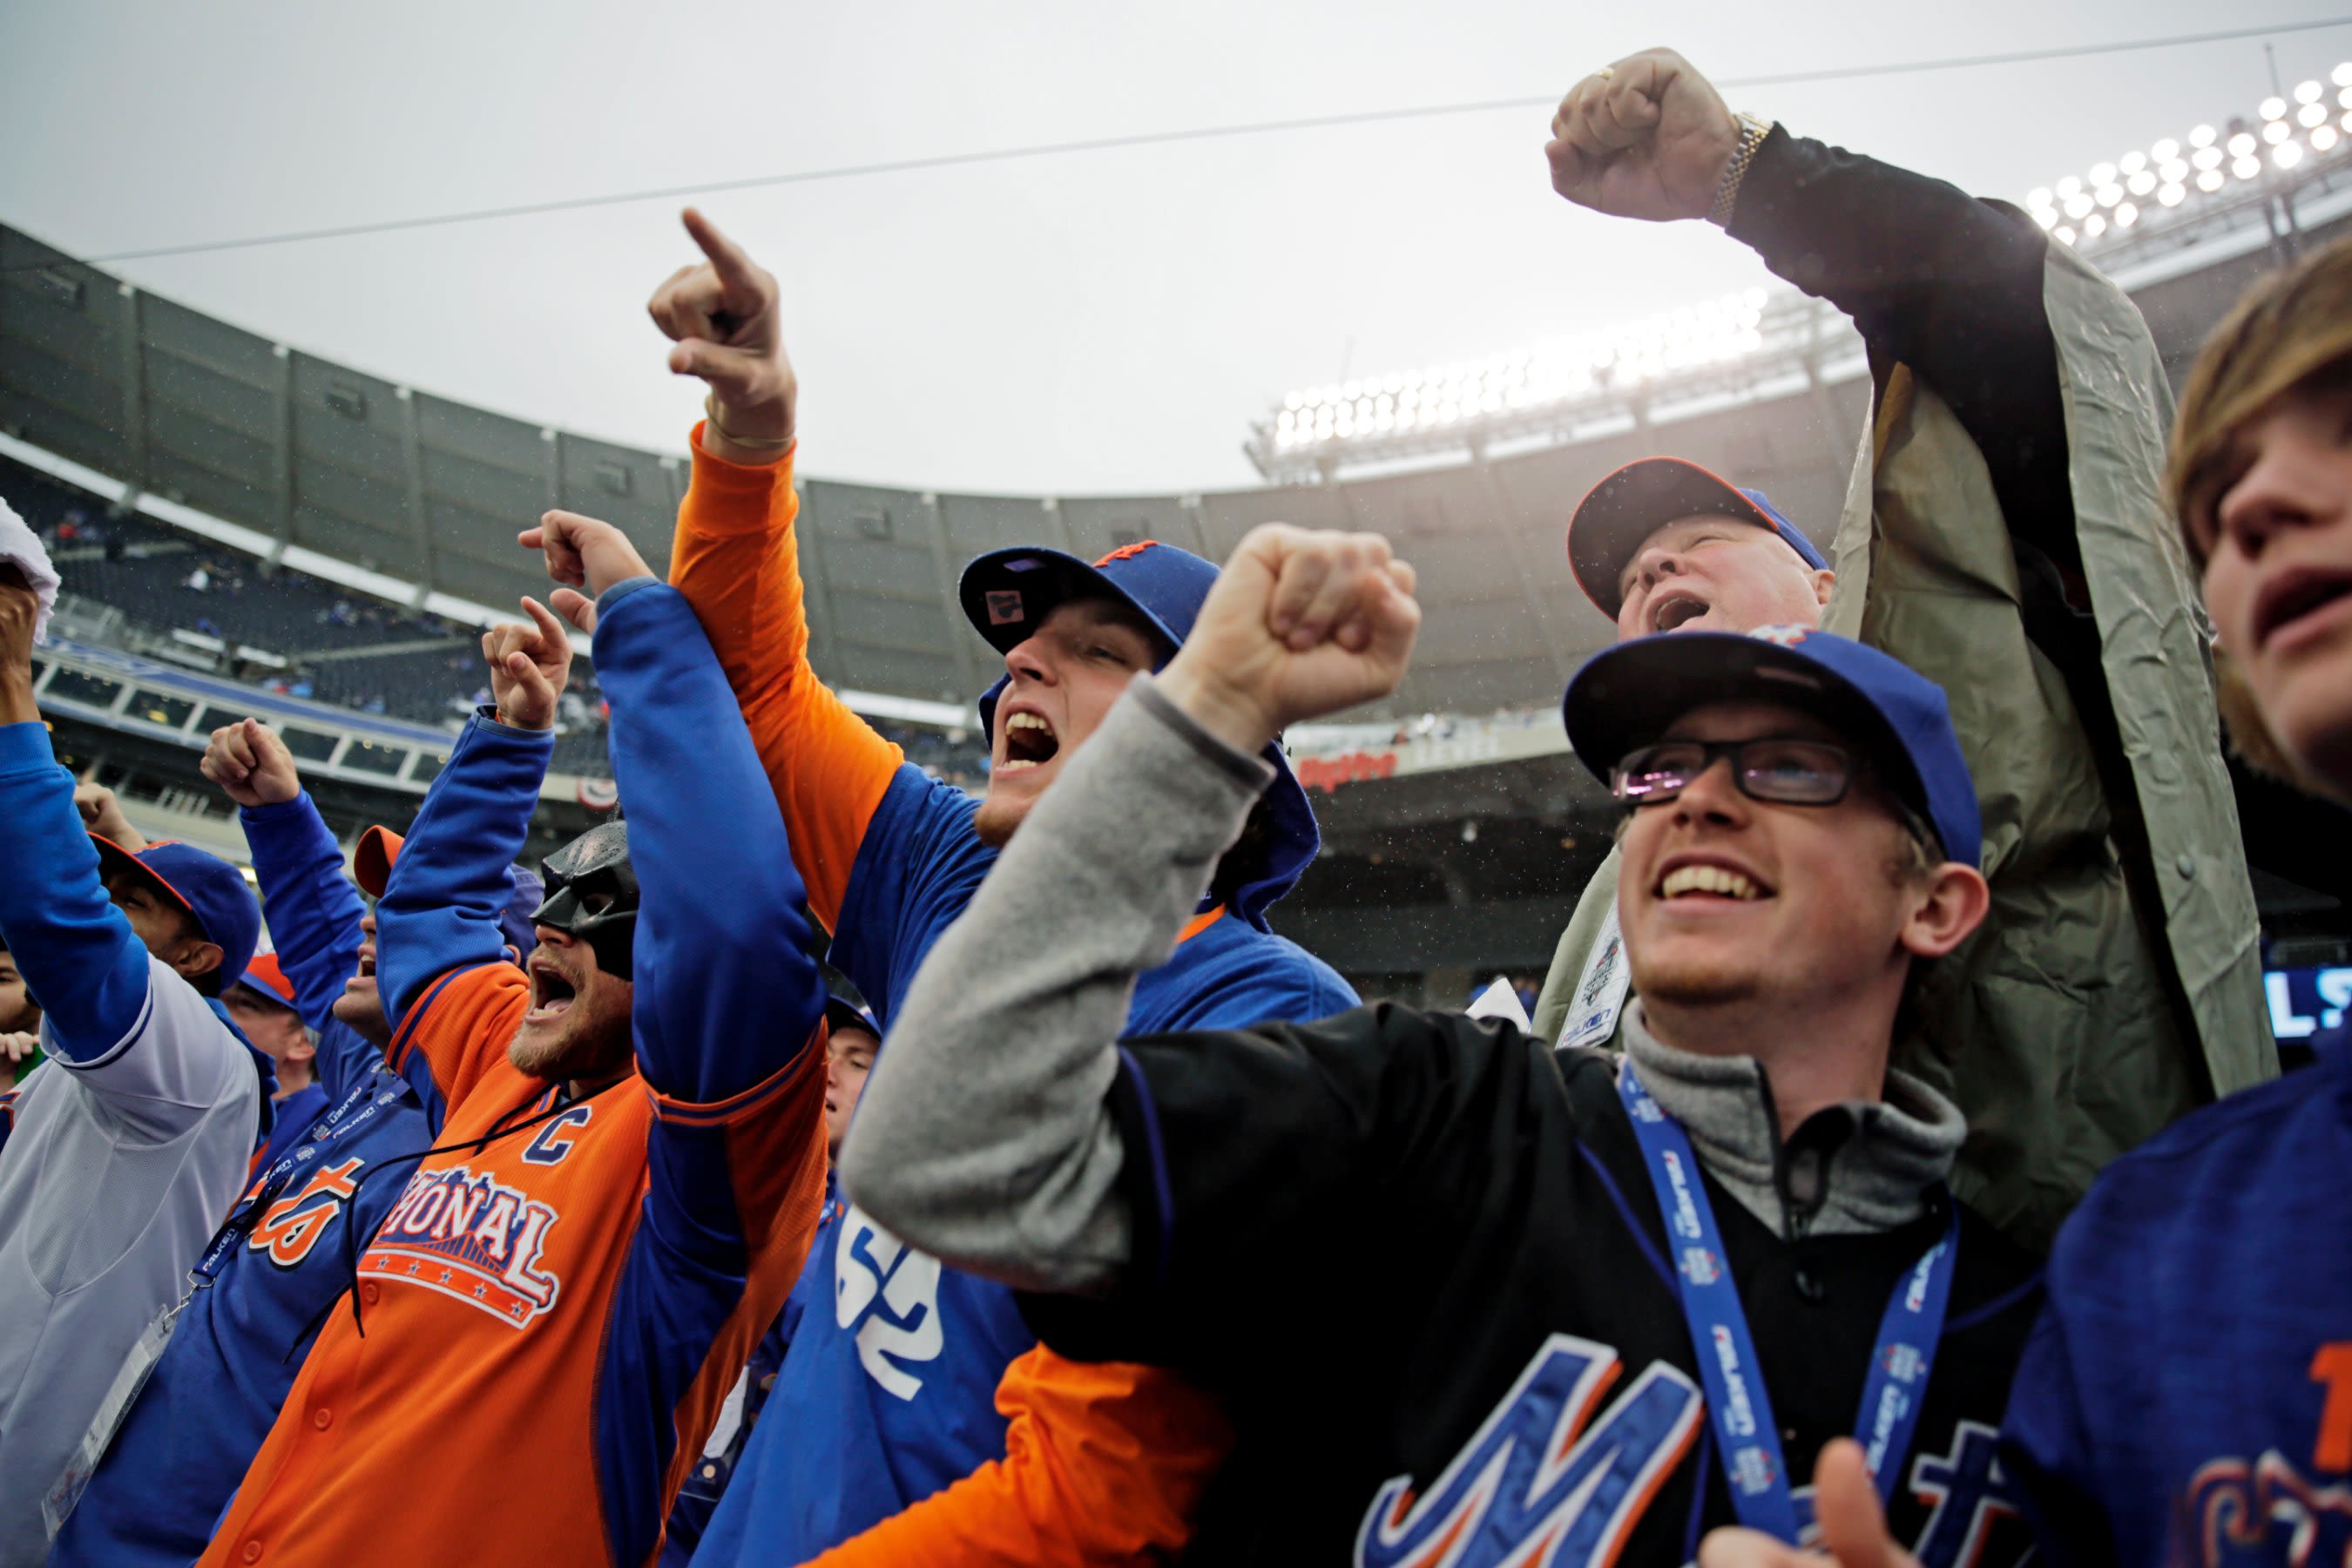 Mets Fans Briefly Revel in an Undefeated Season - The New York Times